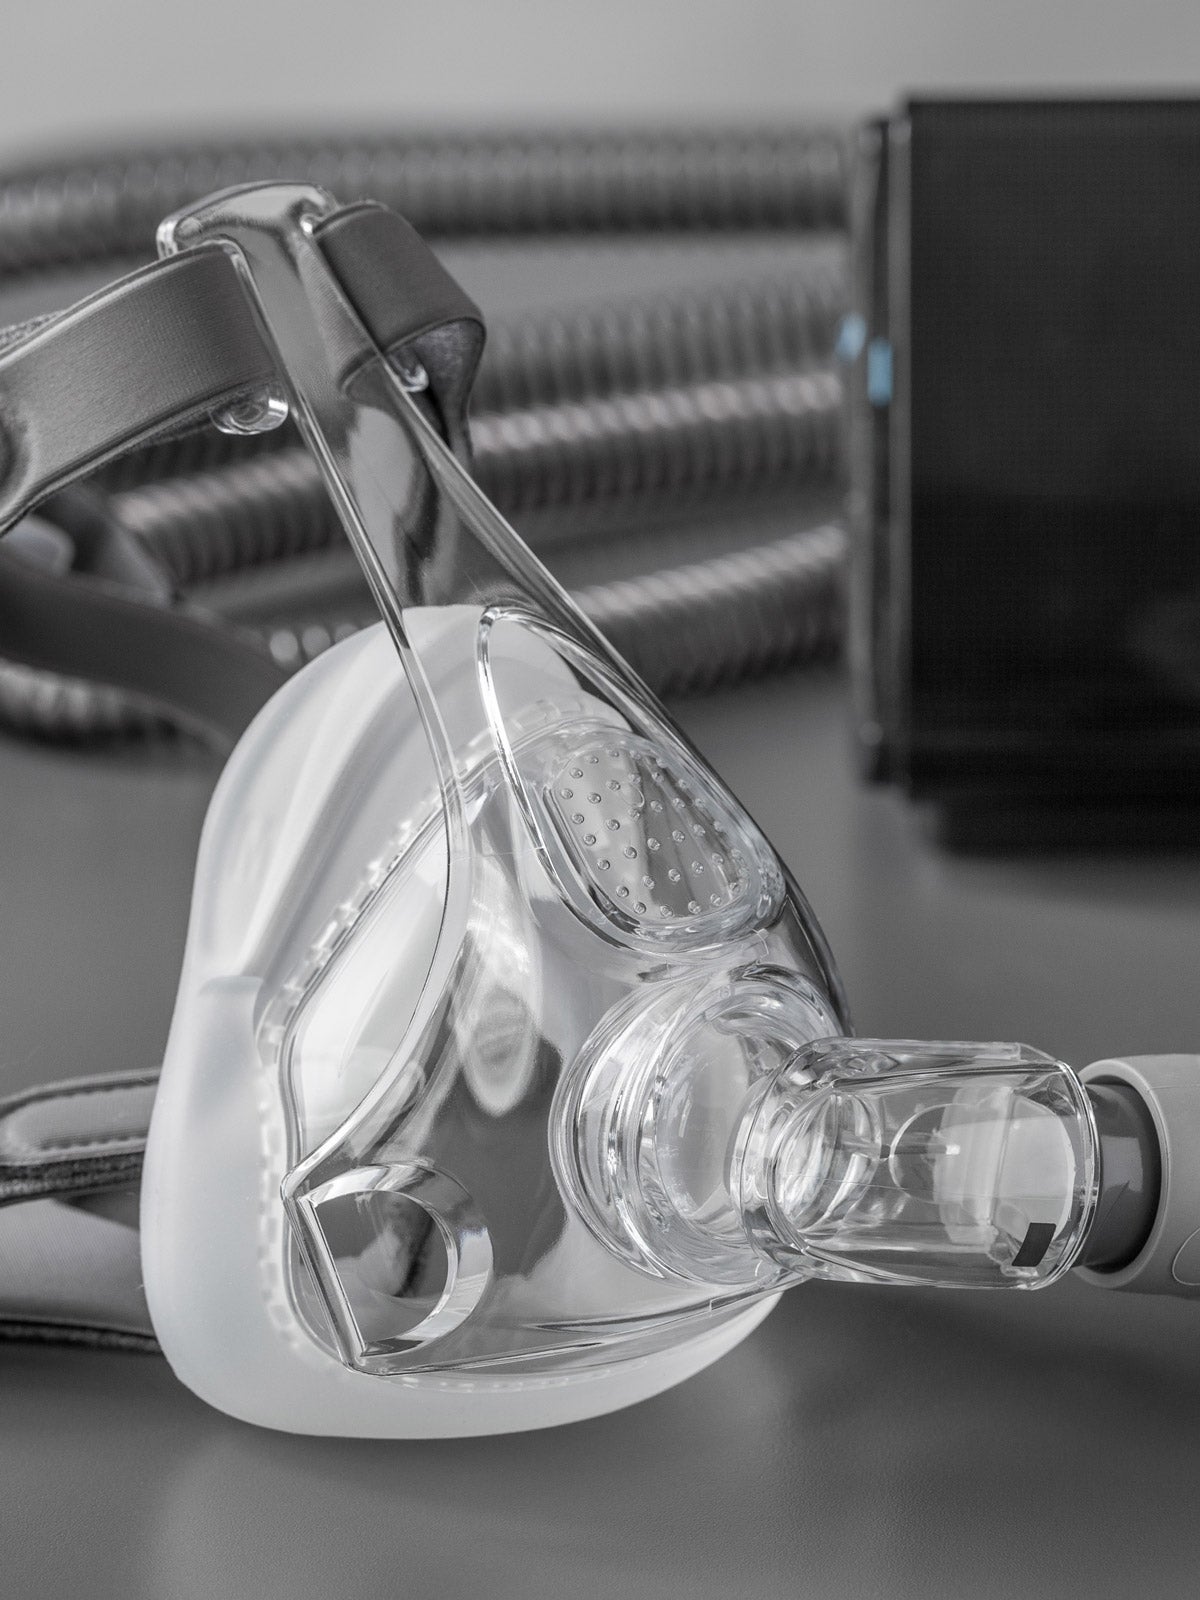 Clear sleep apnea CPAP mask with grey straps and tubes on a grey table. The black CPAP machine is in the background.